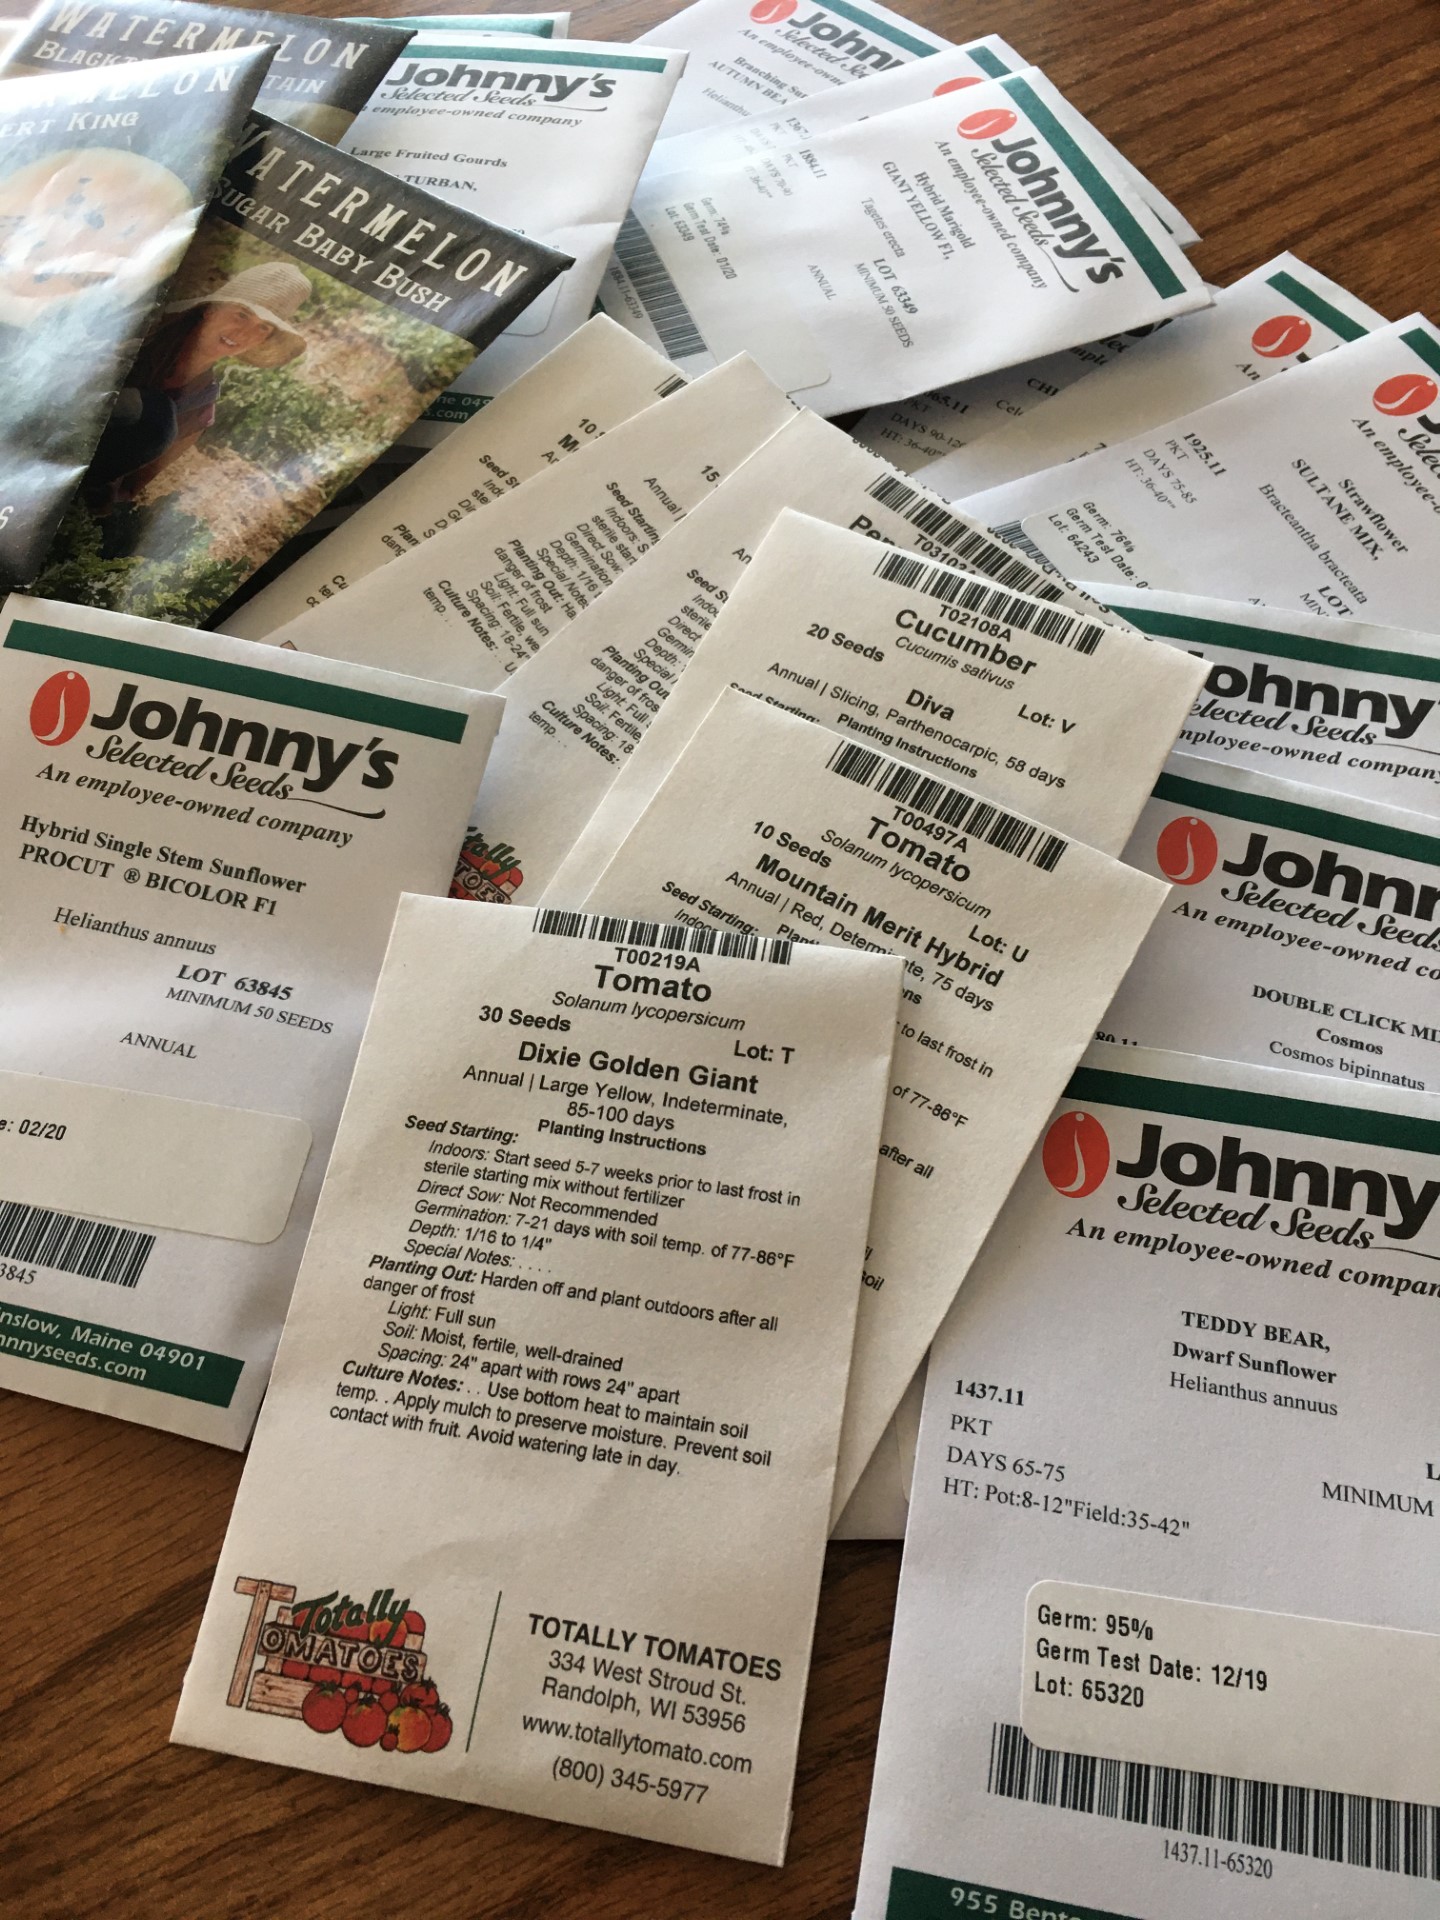 Plan Next Year’s Garden by Ordering Seeds